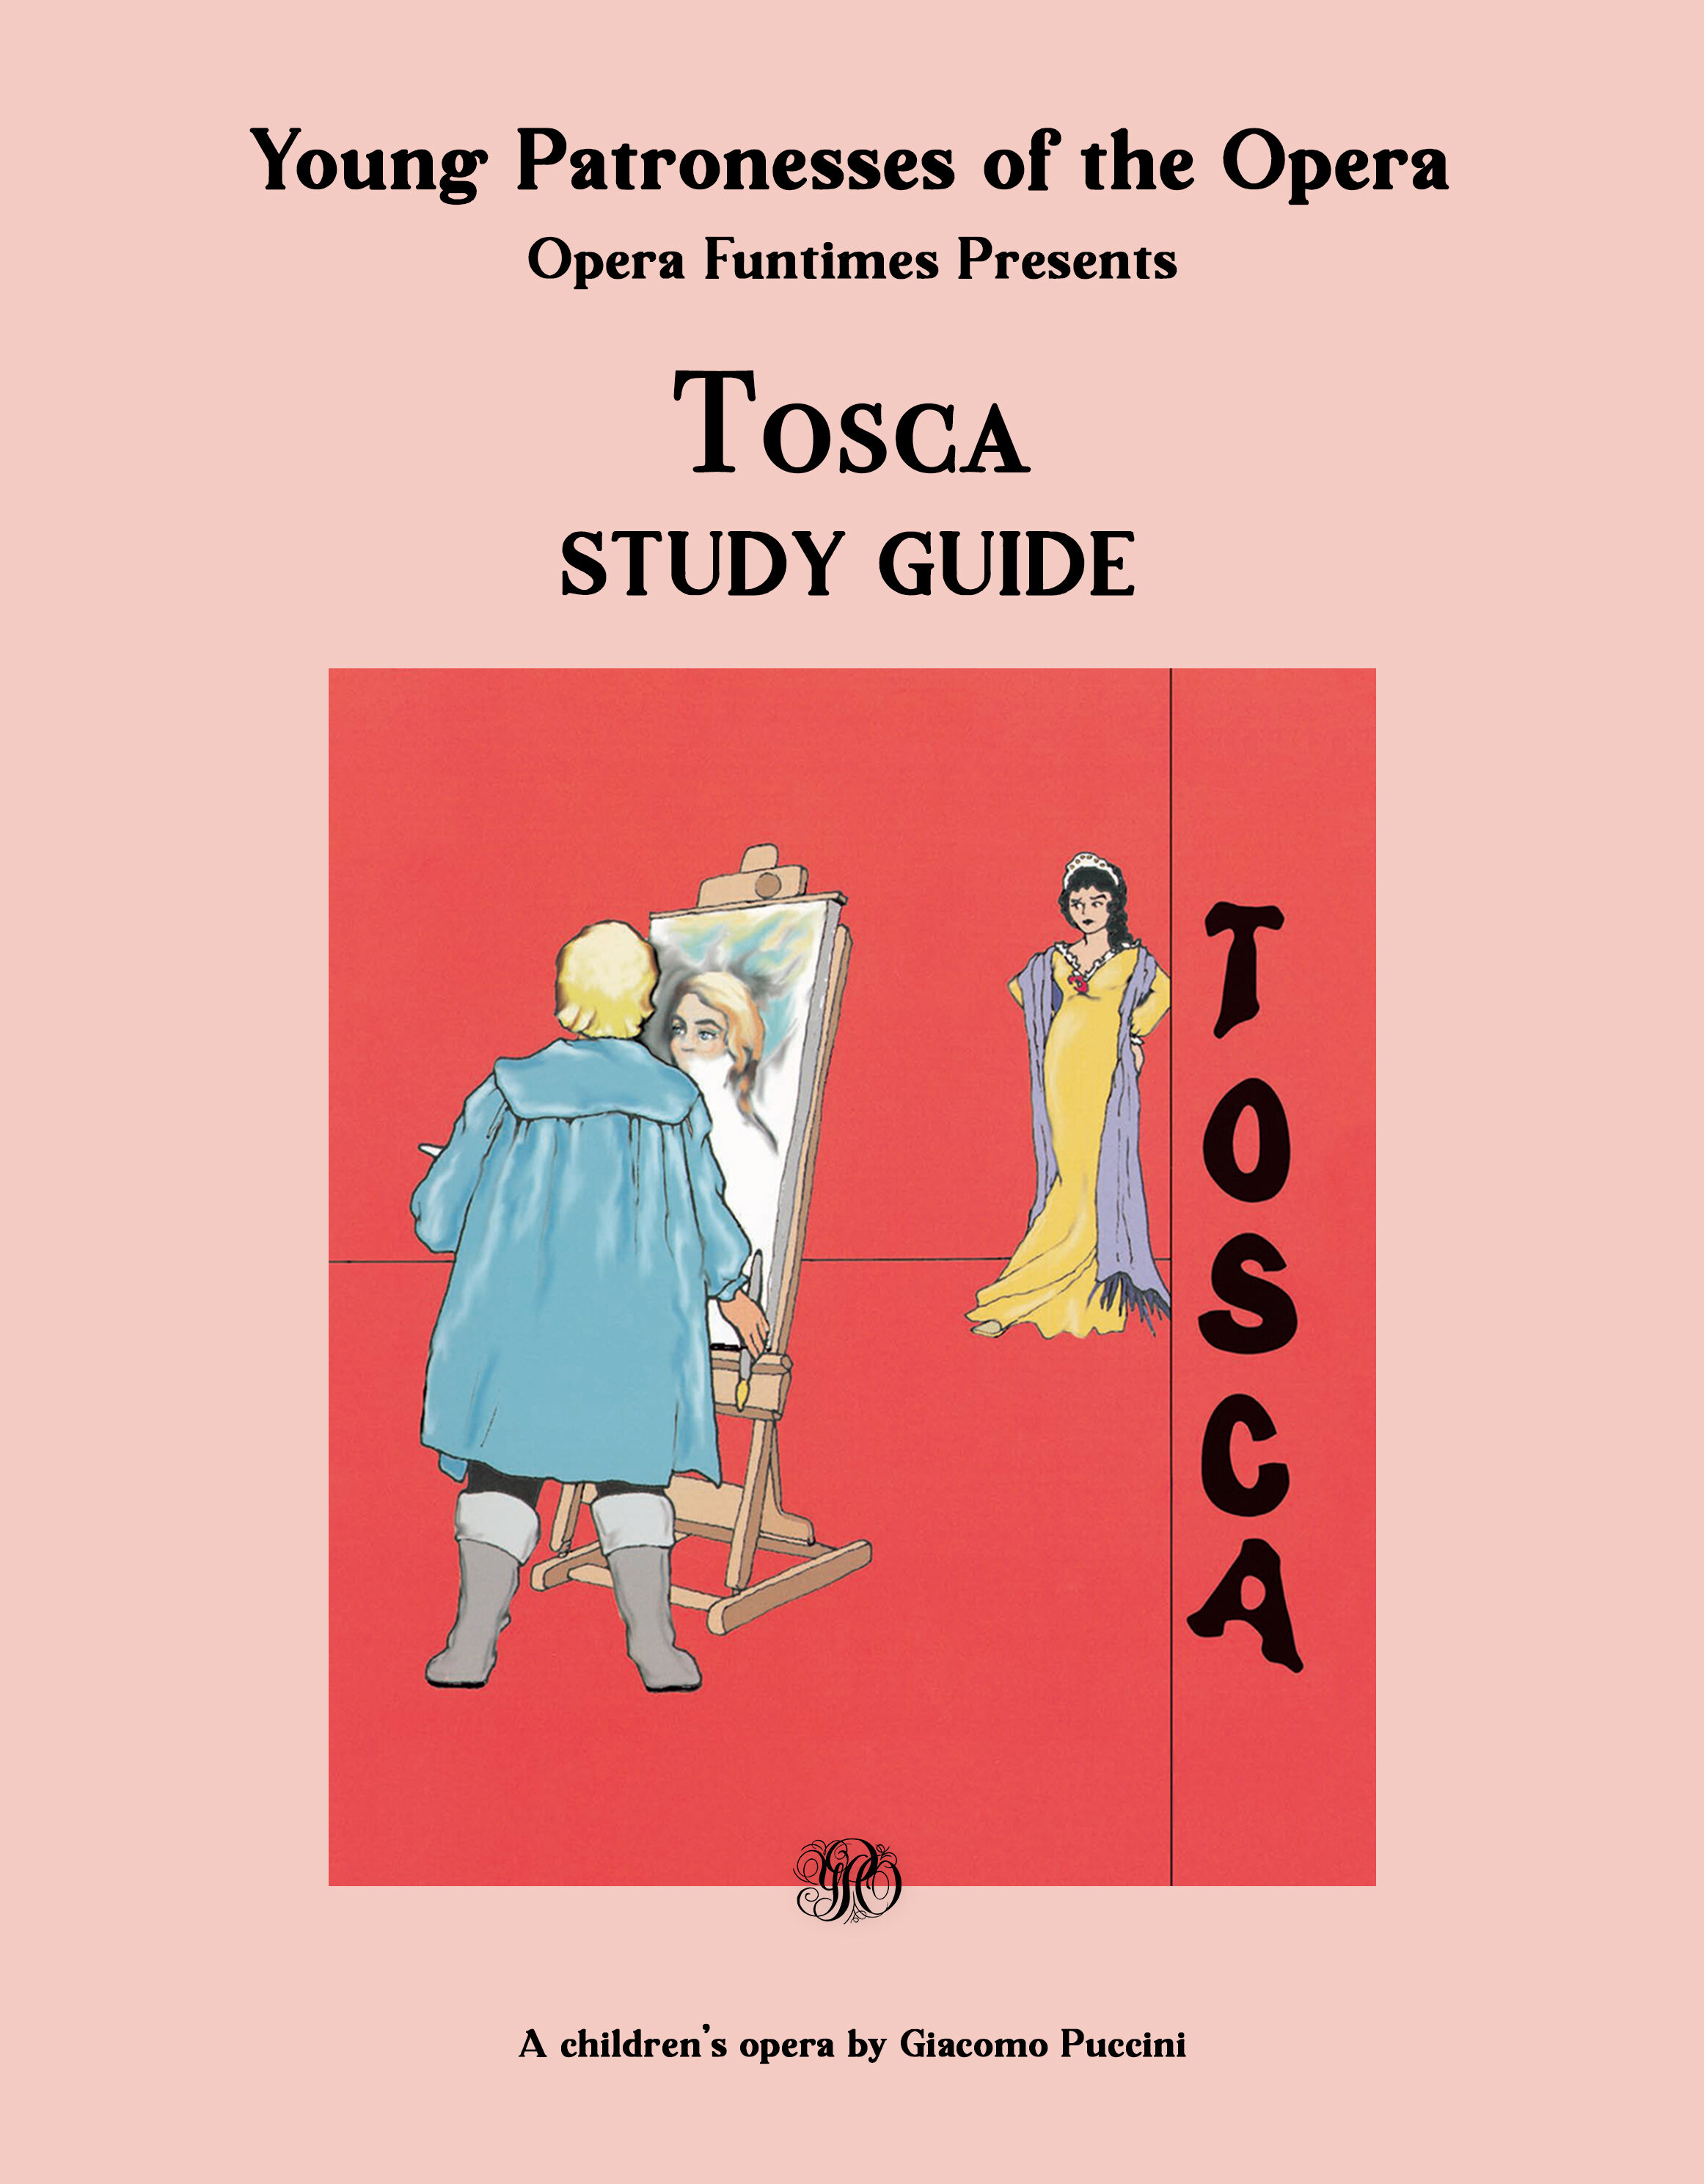 Tosca_Opera Funtimes Study Guide Cover.jpg